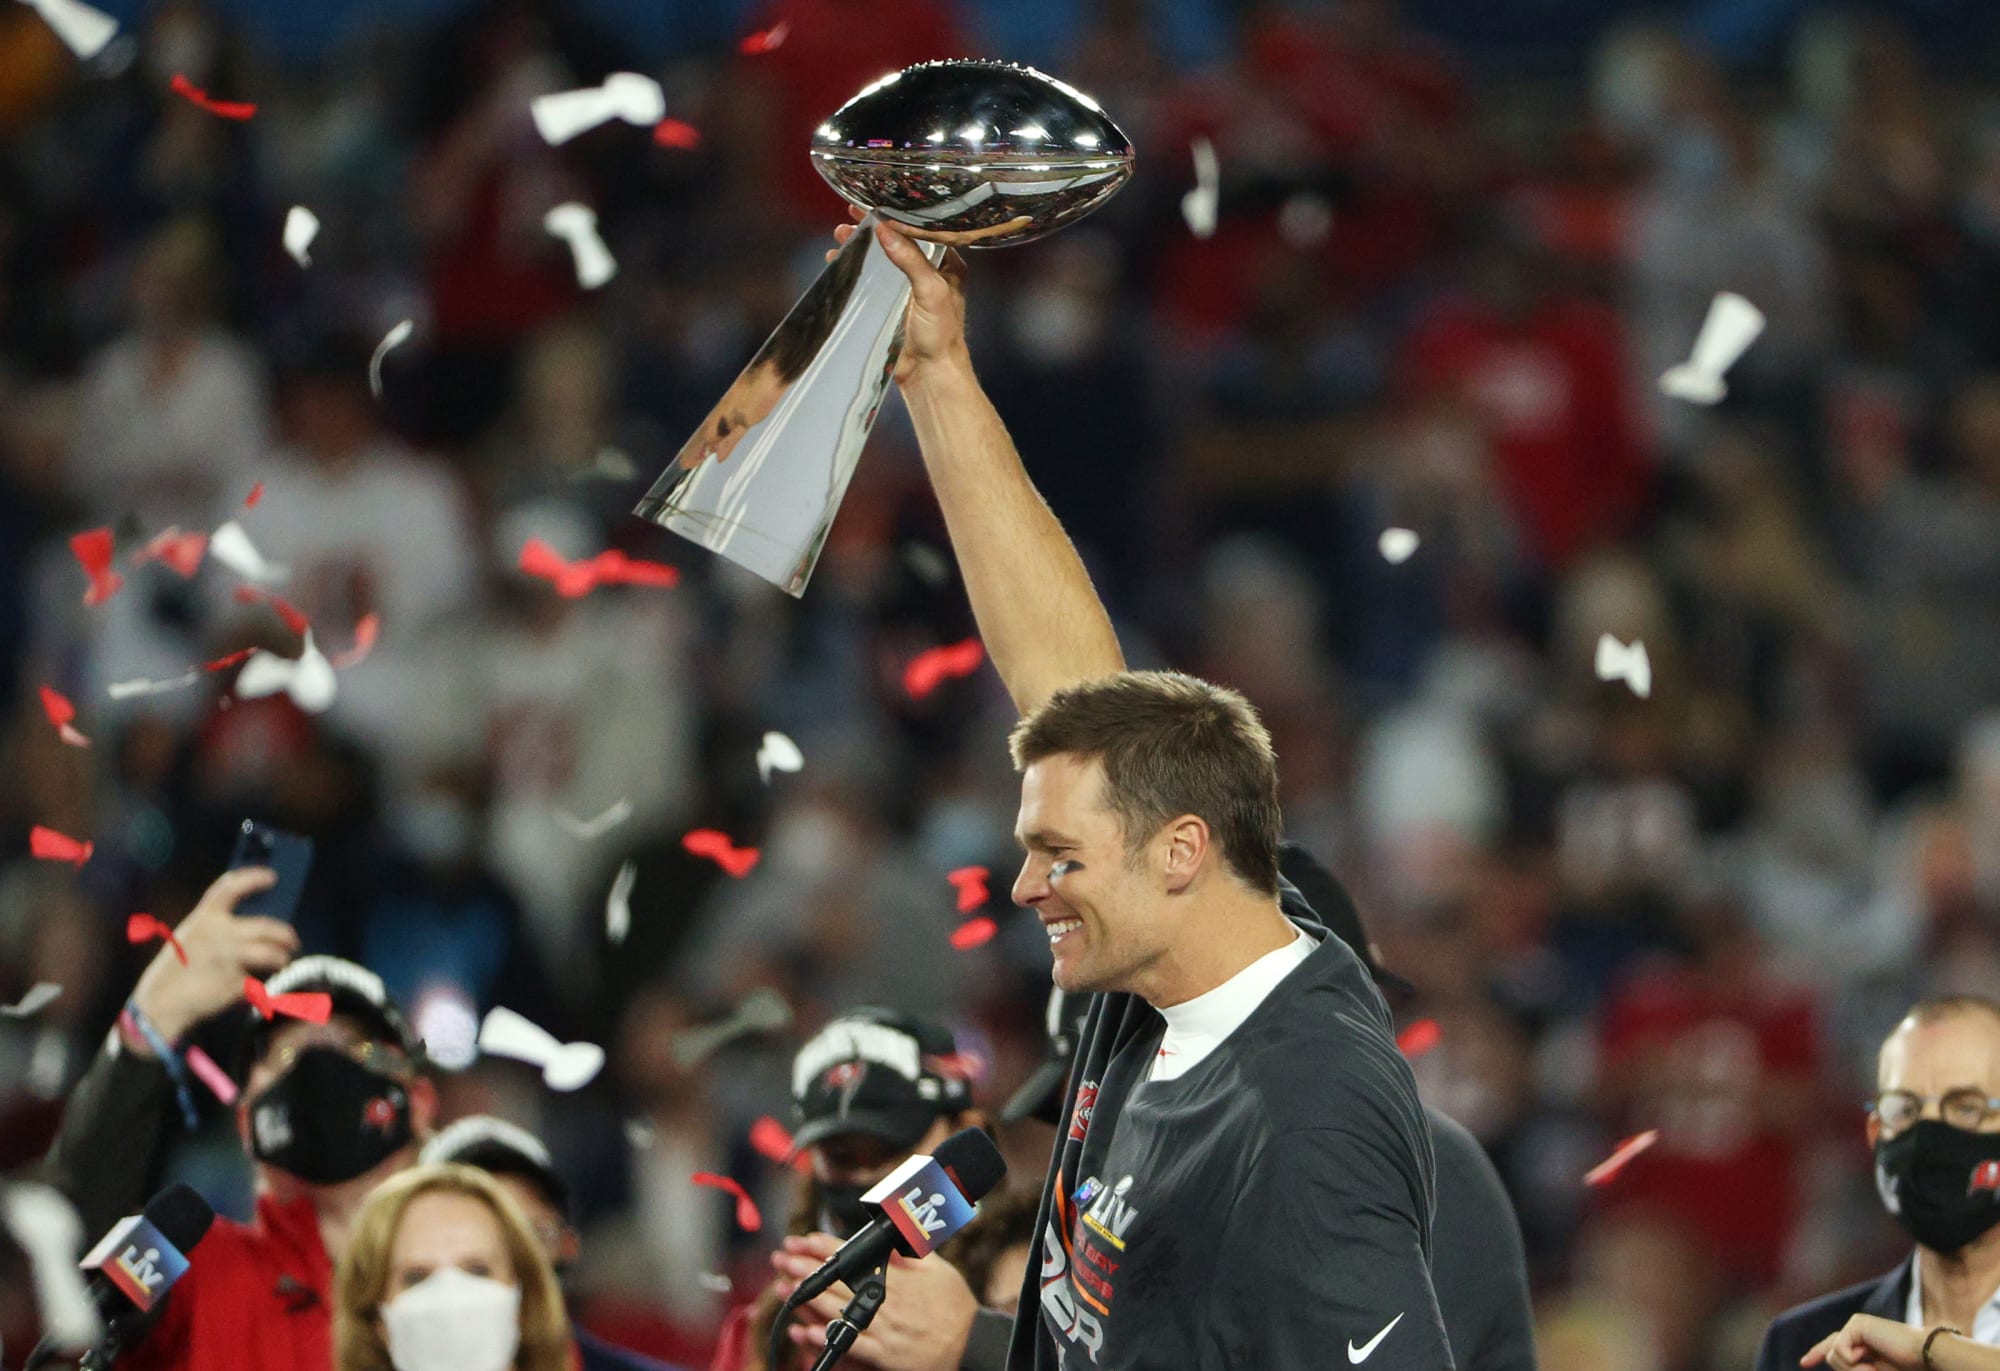 Tom Brady retires: The Top 10 moments of his playing career